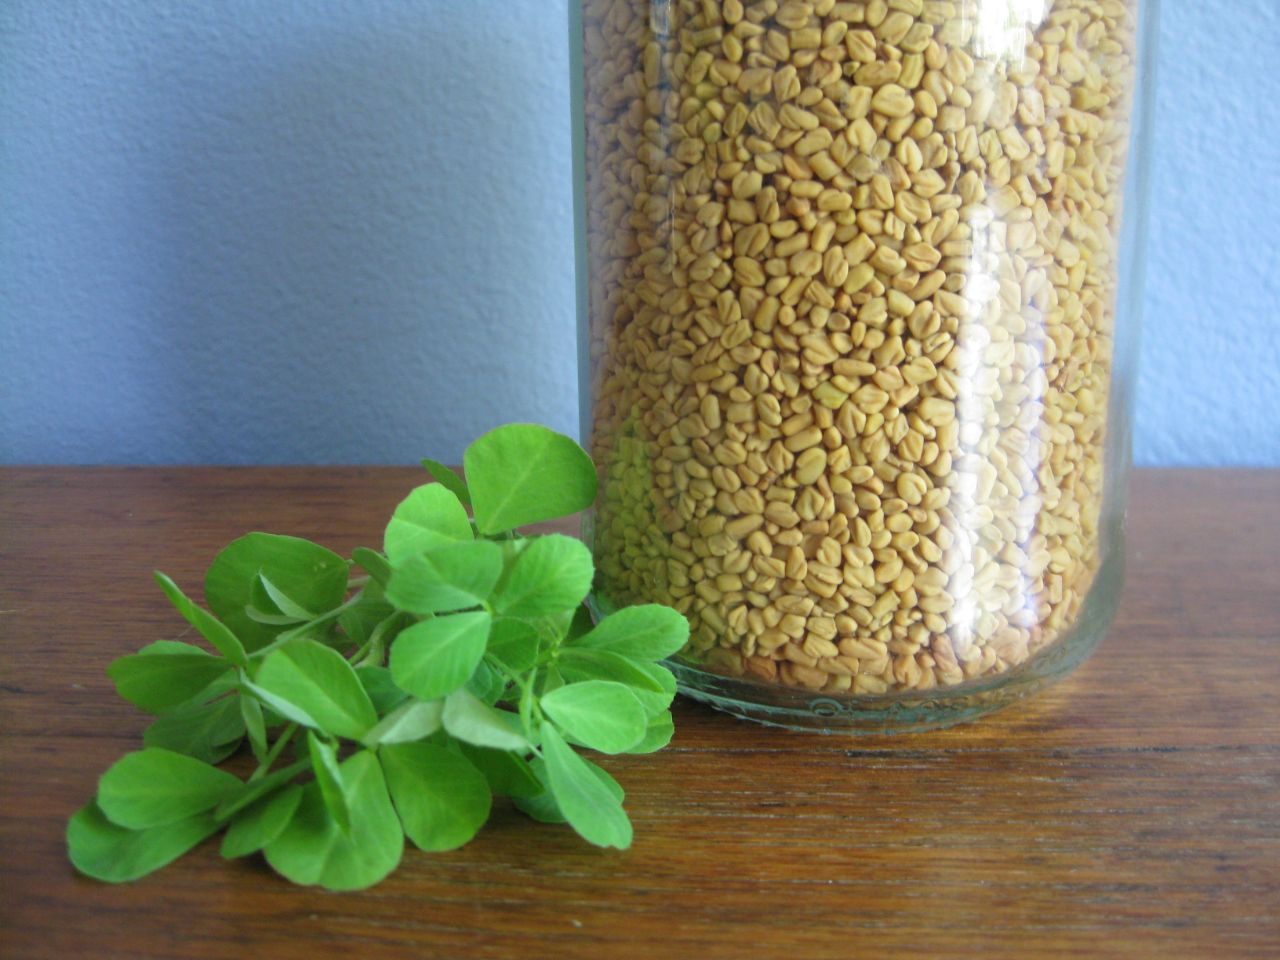 homegrown fenugreek leaves picked for tea next to jar of organic fenugreek seeds from which they were grown